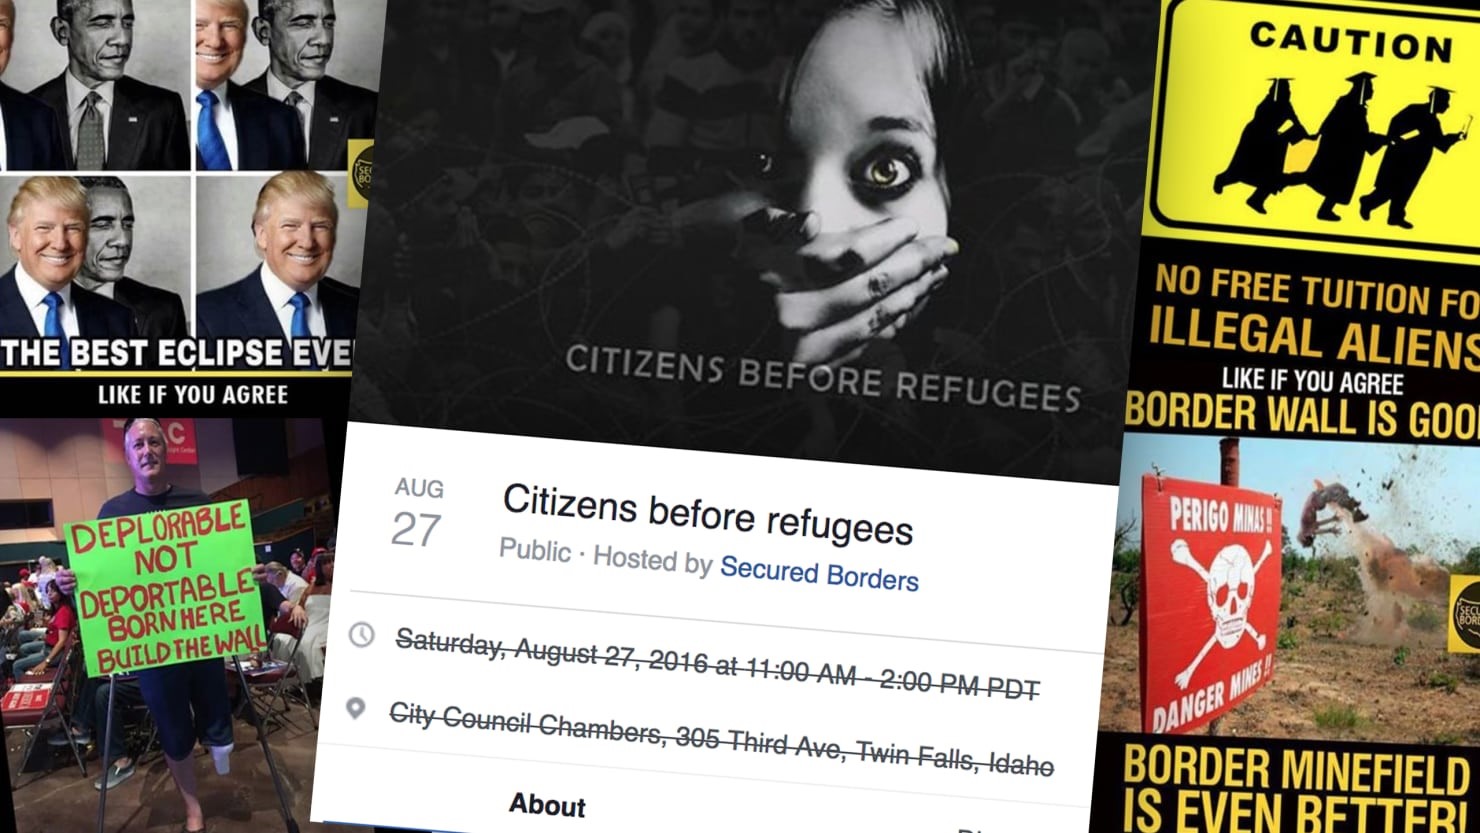 Exclusive: Russia Used Facebook Events to Organize Anti-Immigrant Rallies on U.S. Soil